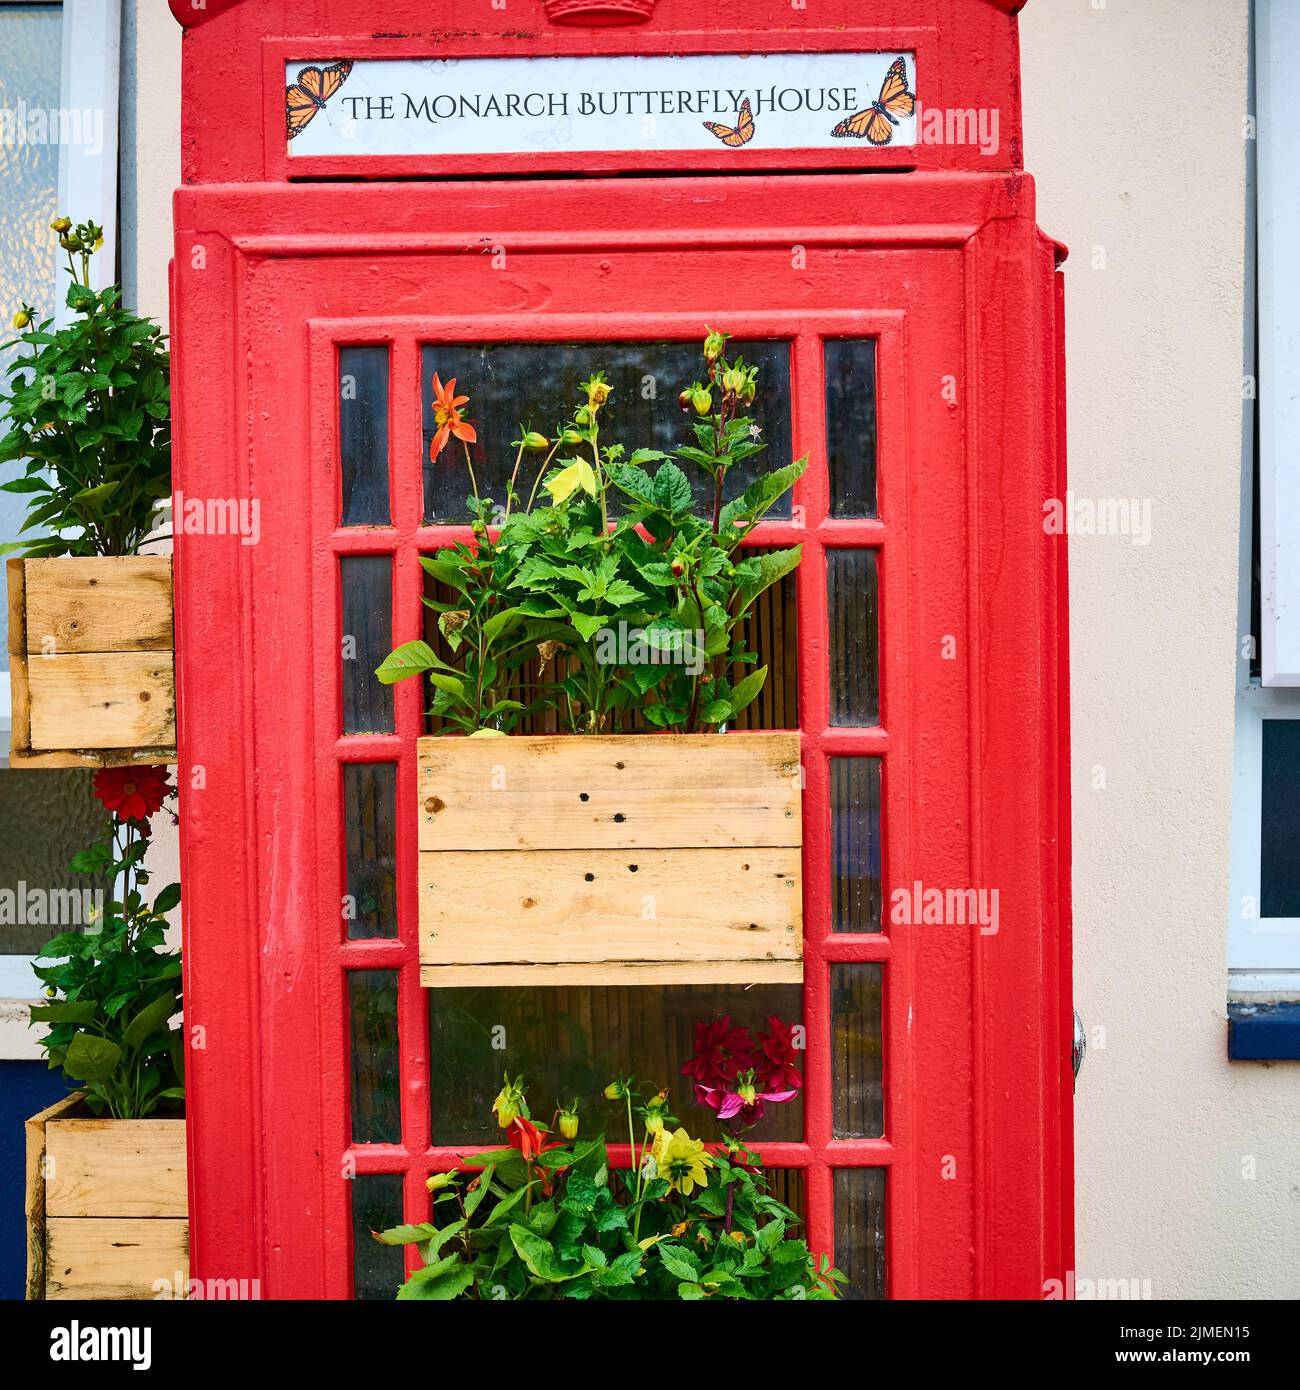 Monarch butterfly house in converted phone box at Victoria Hospital,Blackpool Stock Photo